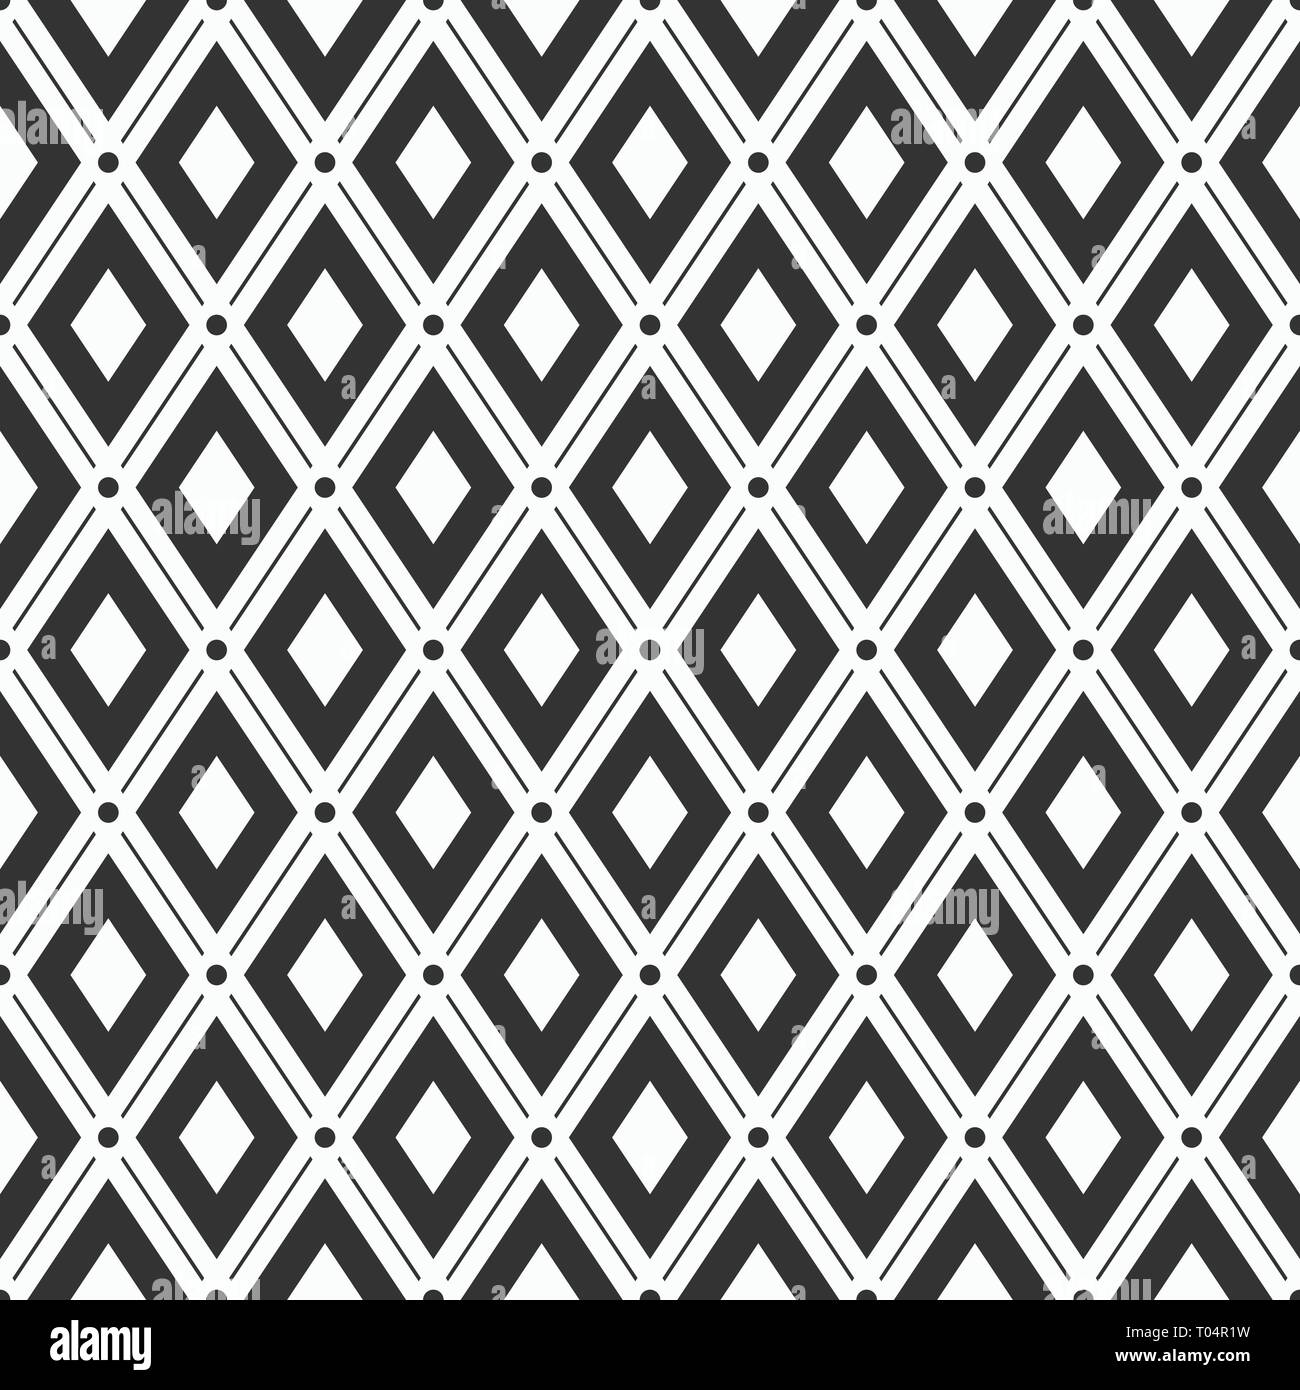 https://c8.alamy.com/comp/T04R1W/abstract-geometric-seamless-pattern-regularly-repeated-rhombuses-with-dots-minimalistic-graphic-print-vector-background-T04R1W.jpg